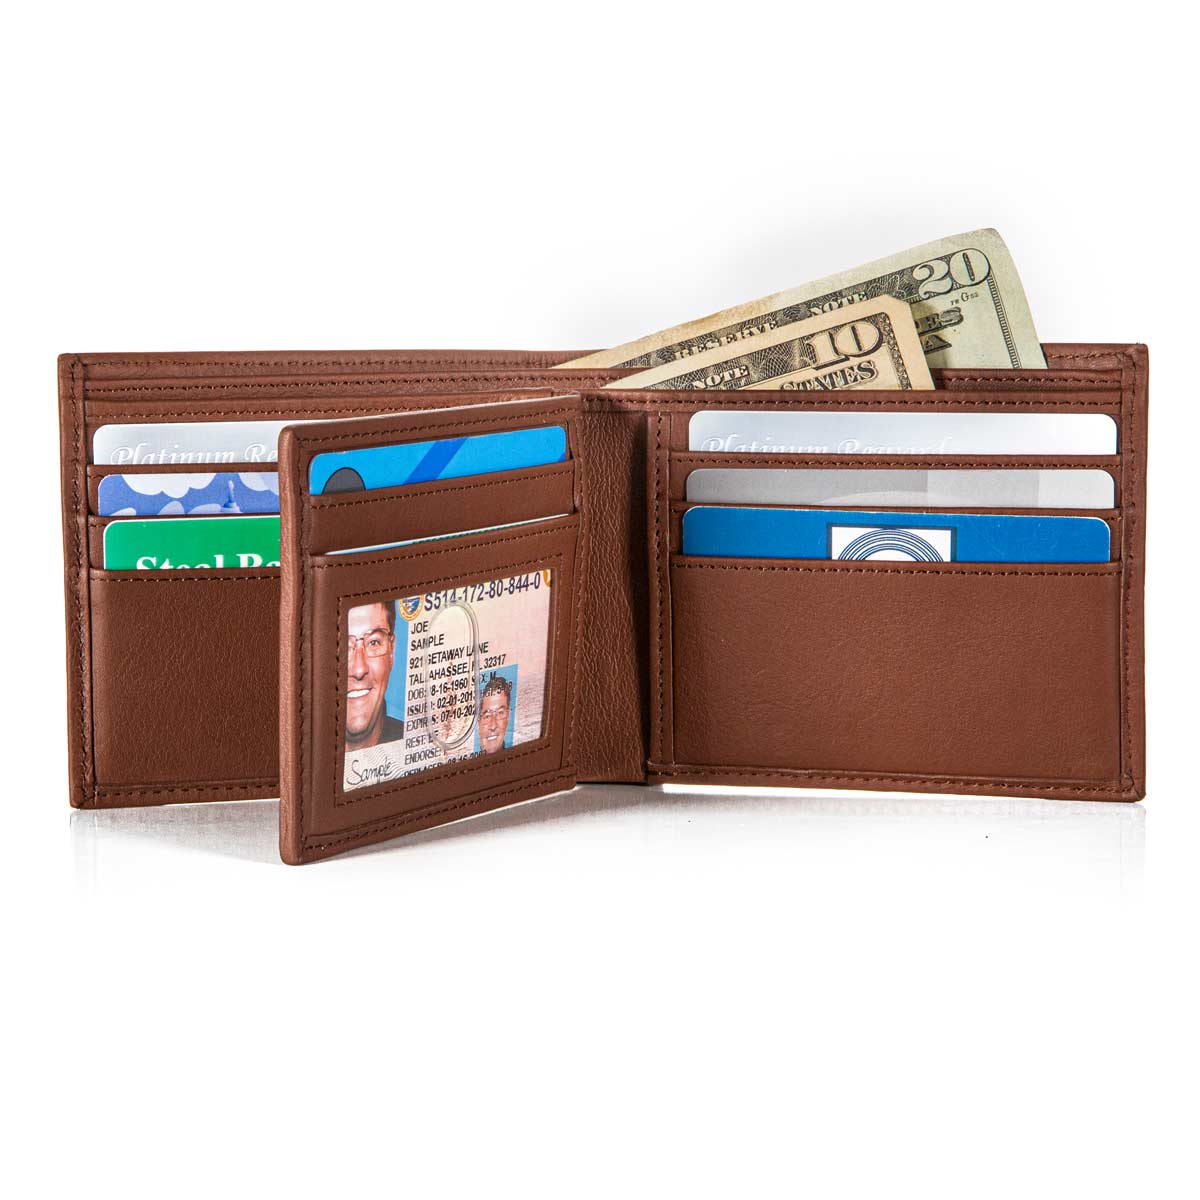 Croc Men's Wallet Personalized Gift For Your Colleague - Incredible Gifts